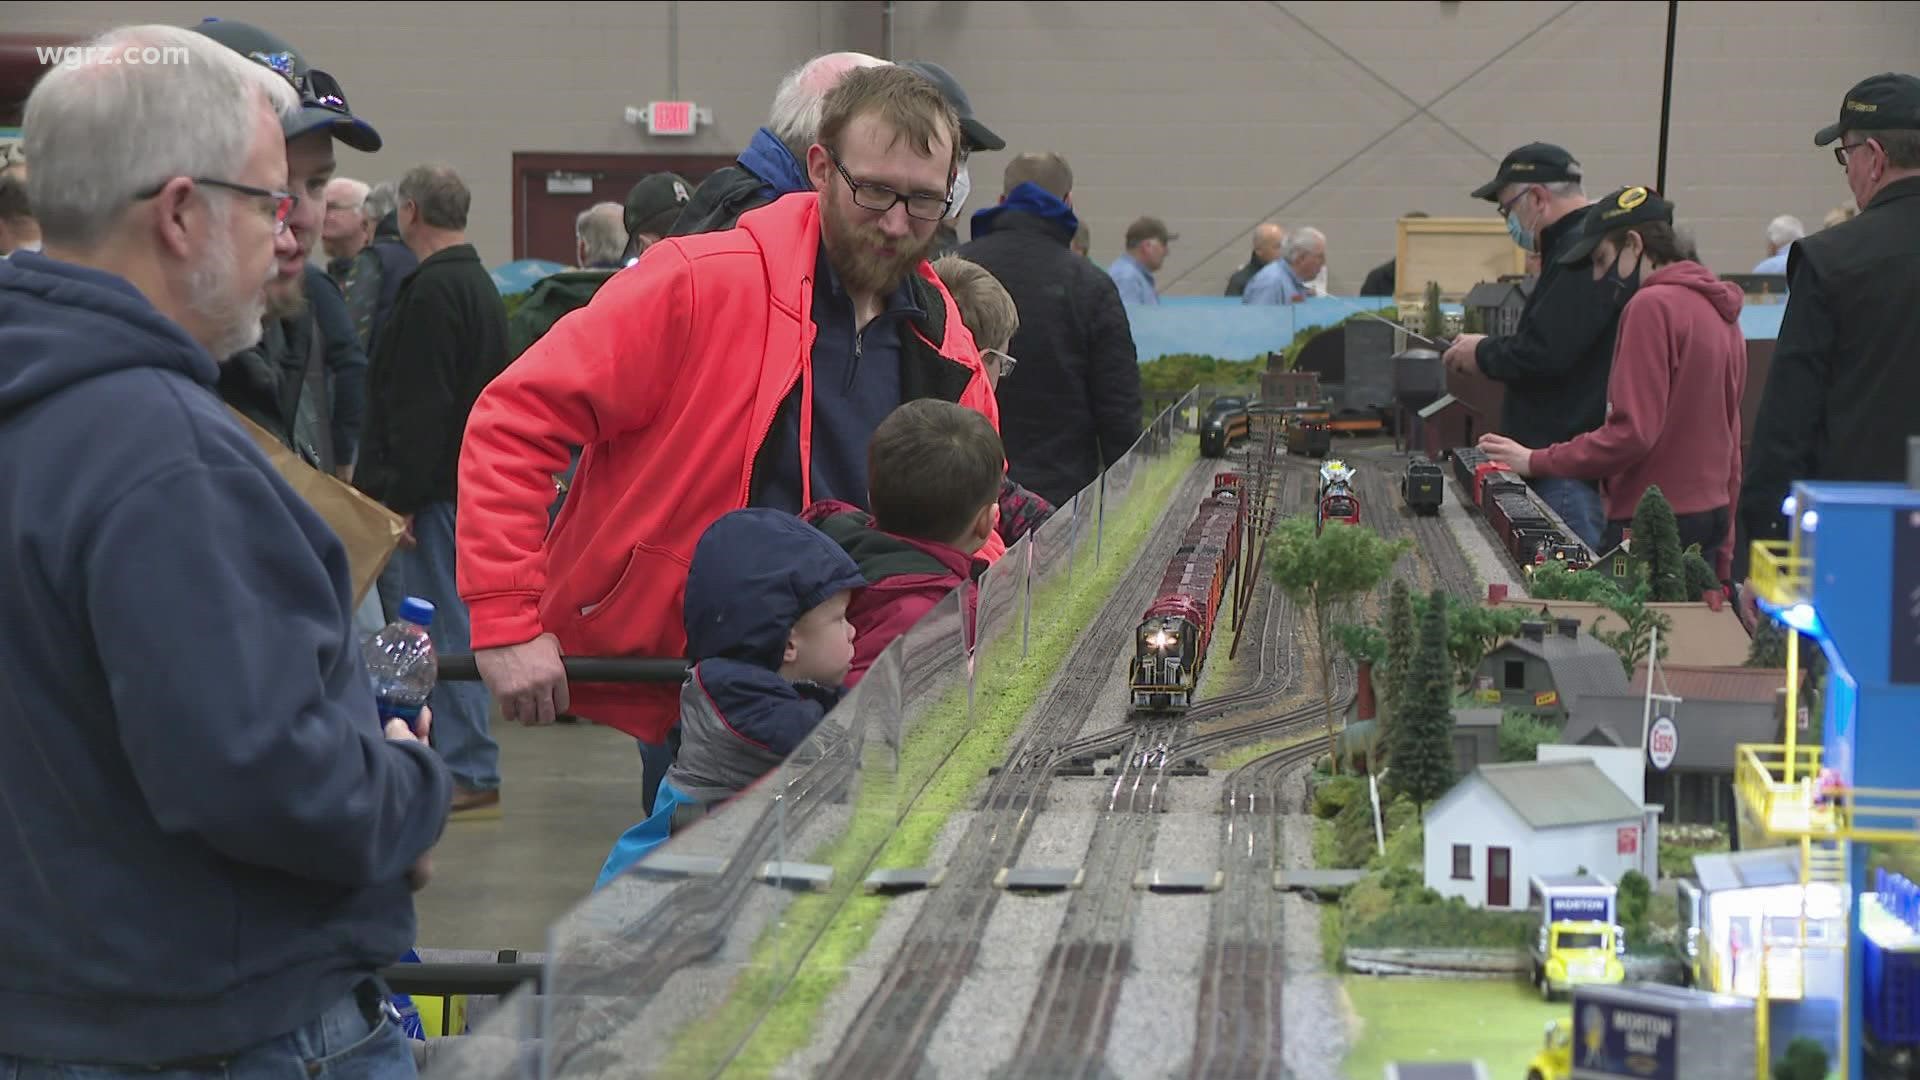 Greater Buffalo Train and Toy Show happening this weekend at Hamburg